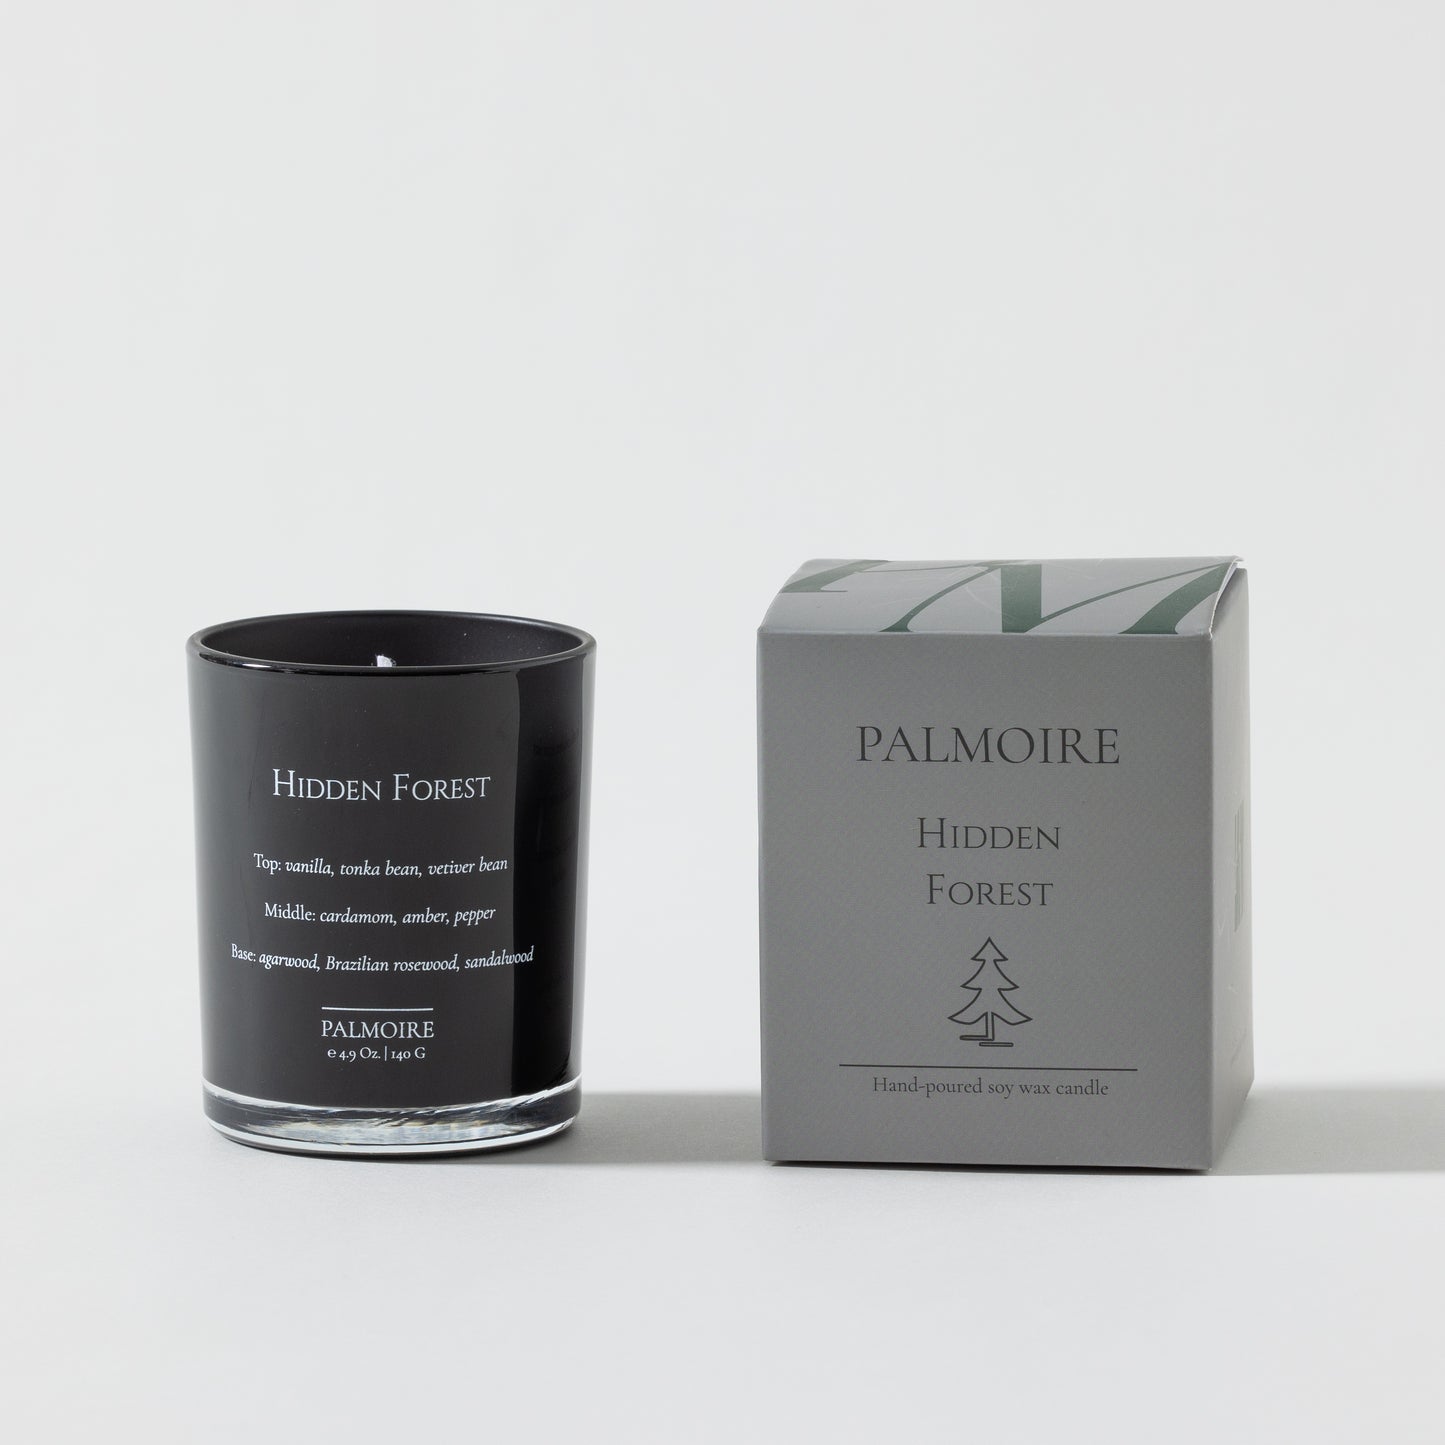 Hidden Forest Soy Wax Candle - PALMOIRE